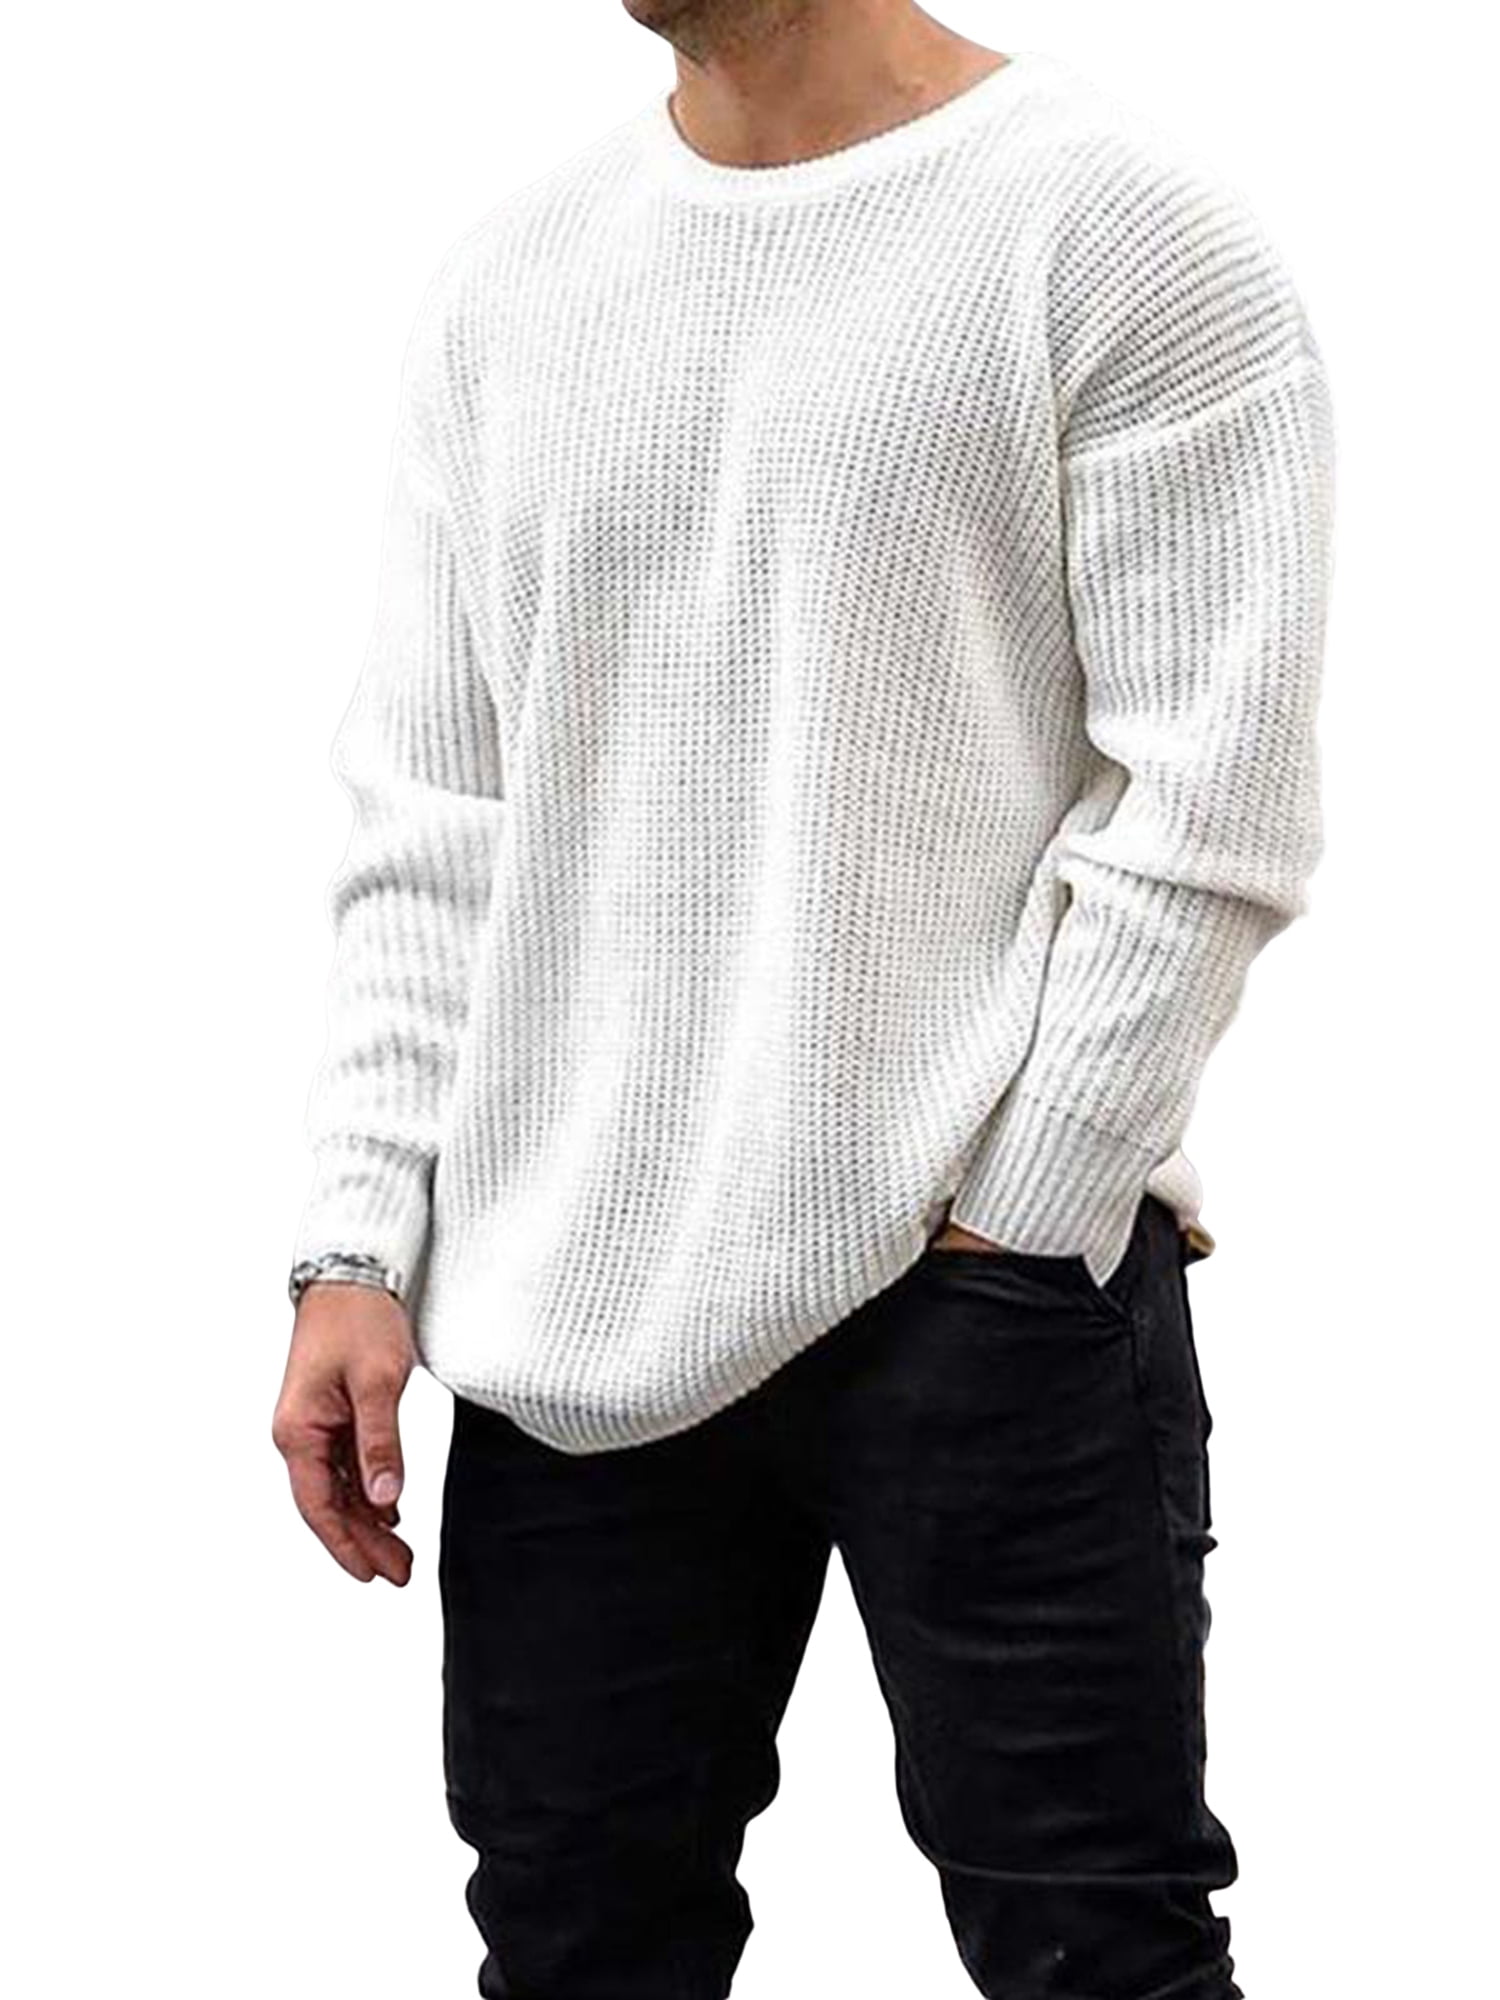 DressU Mens Plus-Size Mock Neck Pullover Long-Sleeve Knitting Sweater Top 